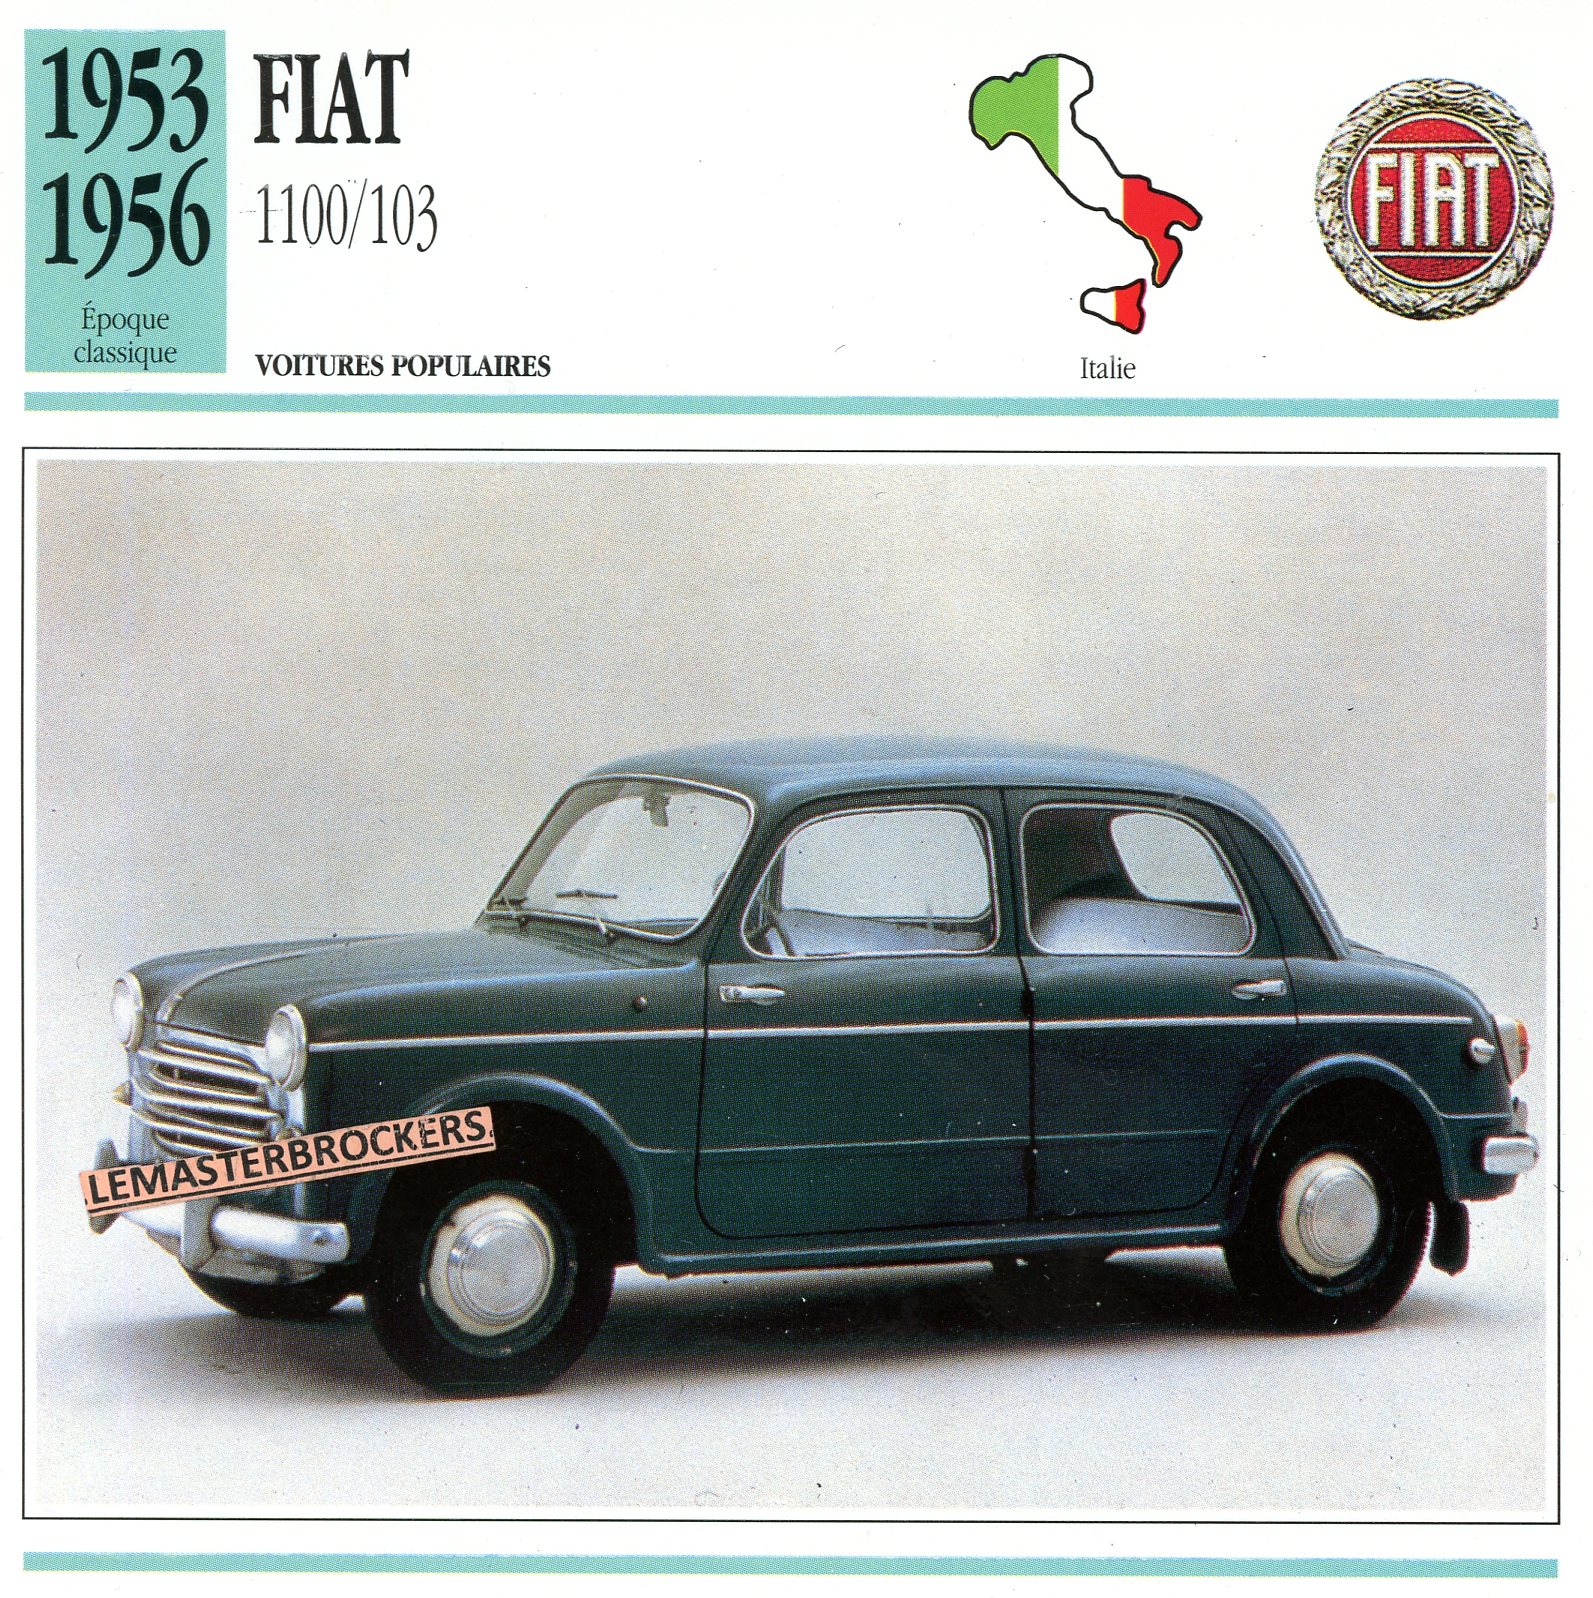 FIAT-1100/103-FICHE-AUTO-CARD-CARS-LEMASTERBROCKERS